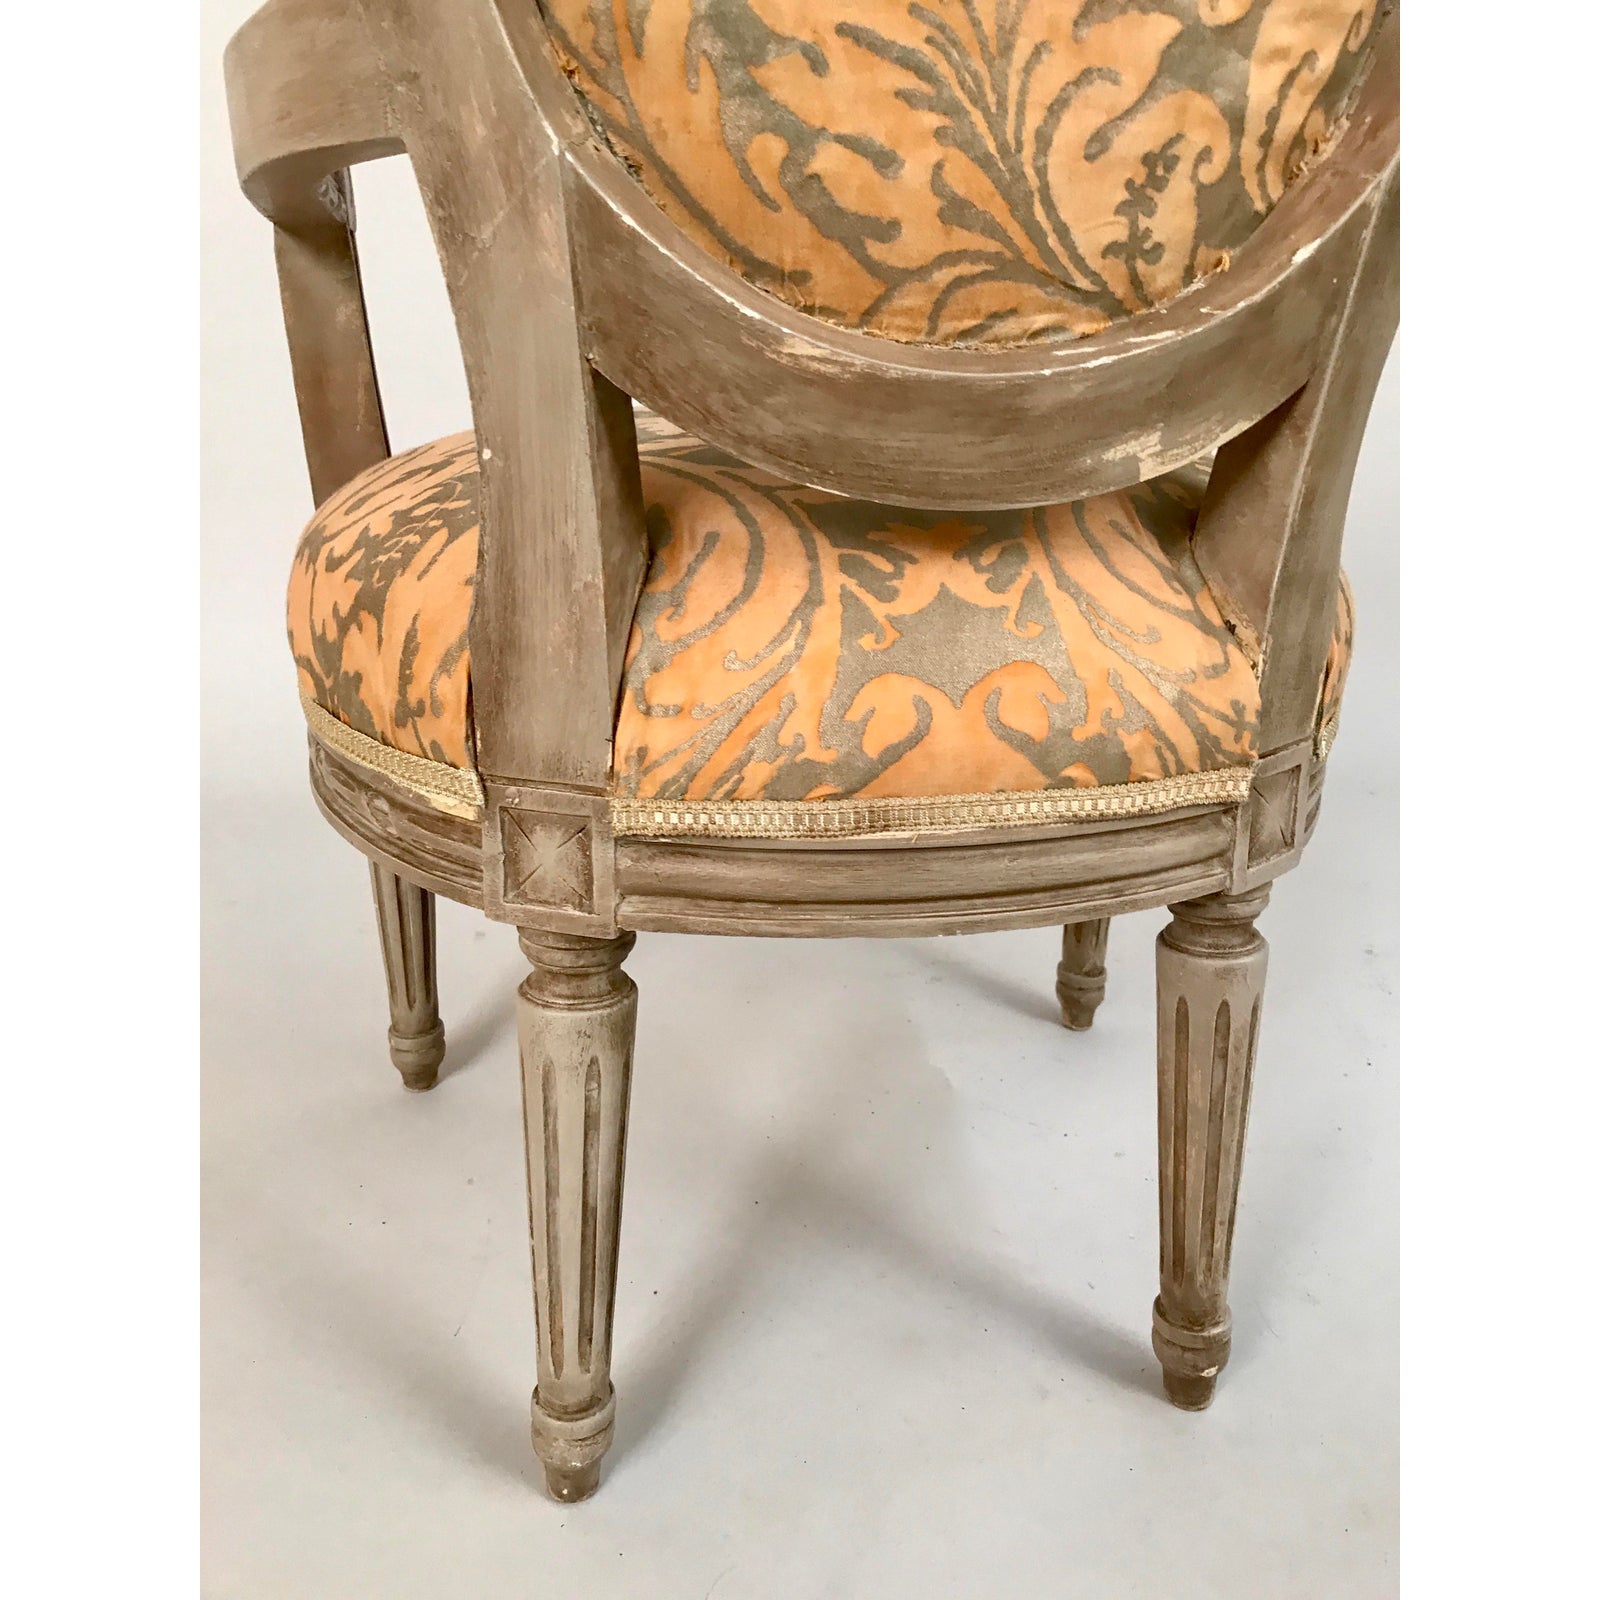 Circa 1940 French Louis XVI Style Children's Armchair Attributed